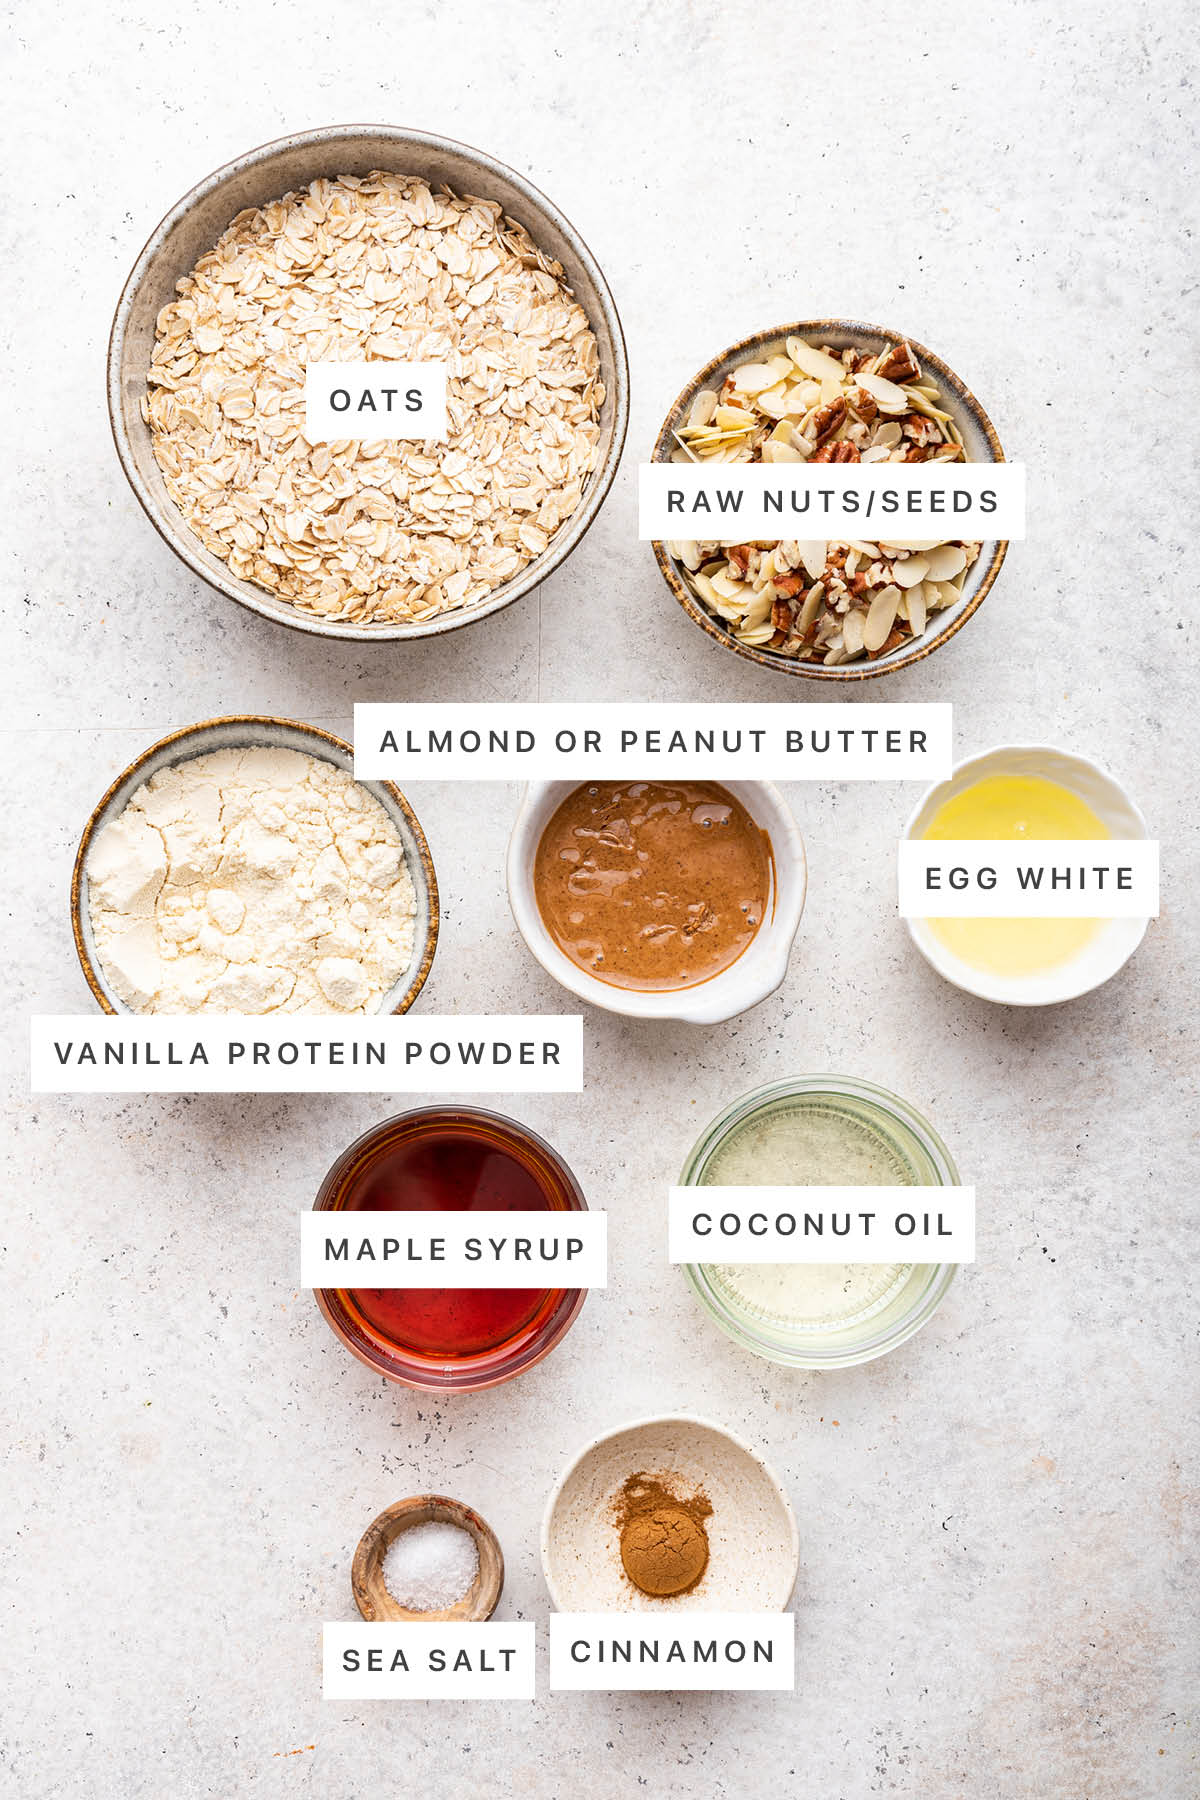 Ingredients measured out to make protein granola: oats, raw nuts/seeds, almond or peanut butter, egg white, vanilla protein powder, maple syrup, coconut oil, sea salt and cinnamon.